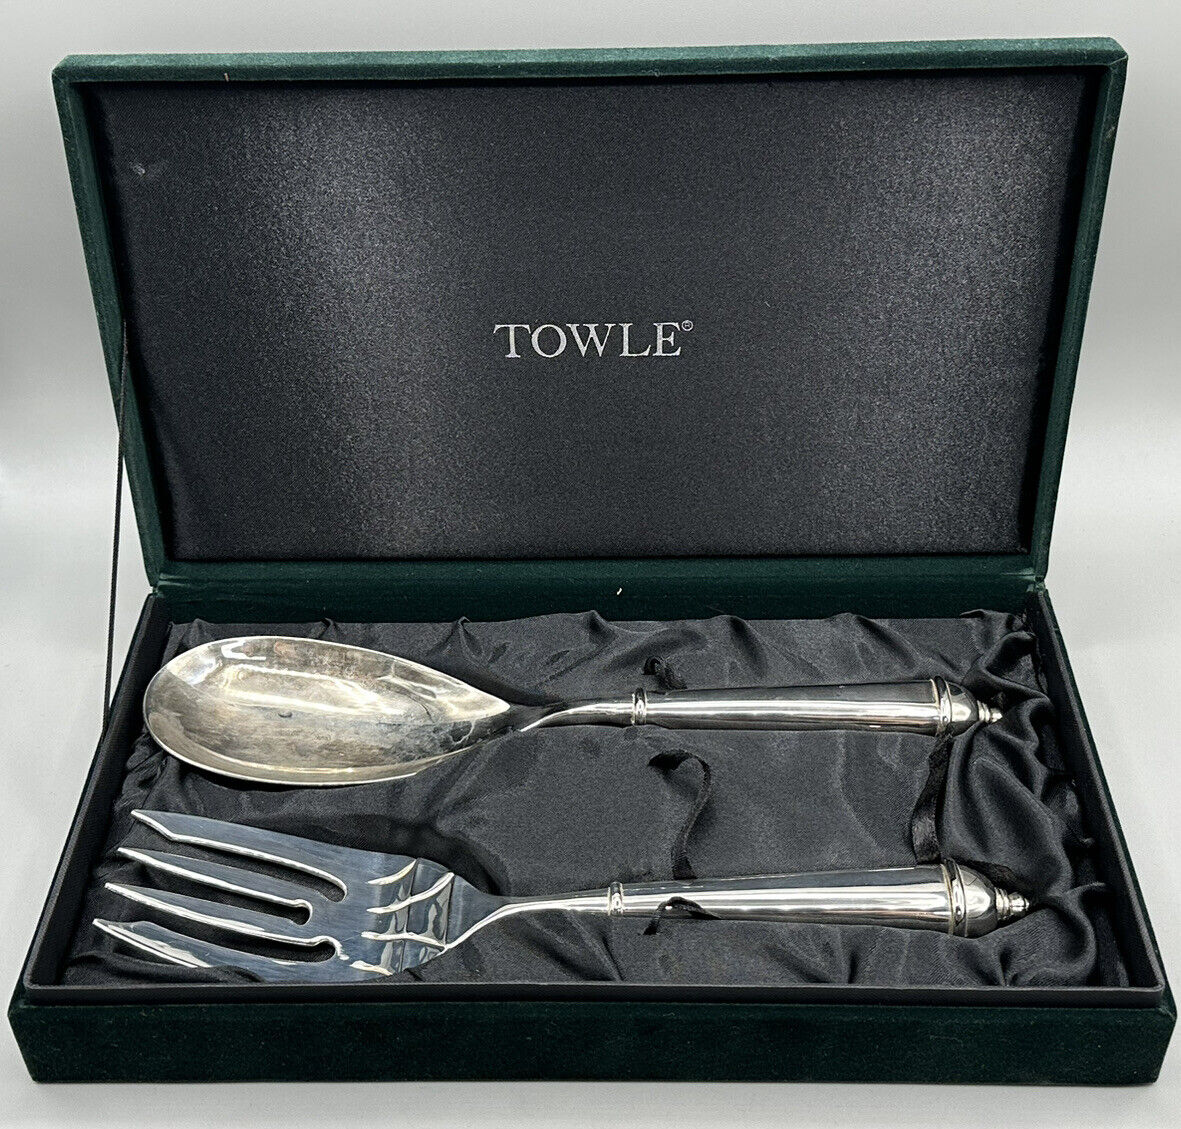 1999 Towle Silversmiths Large Salad Fork & Spoon With Green Velvet Case Vintage